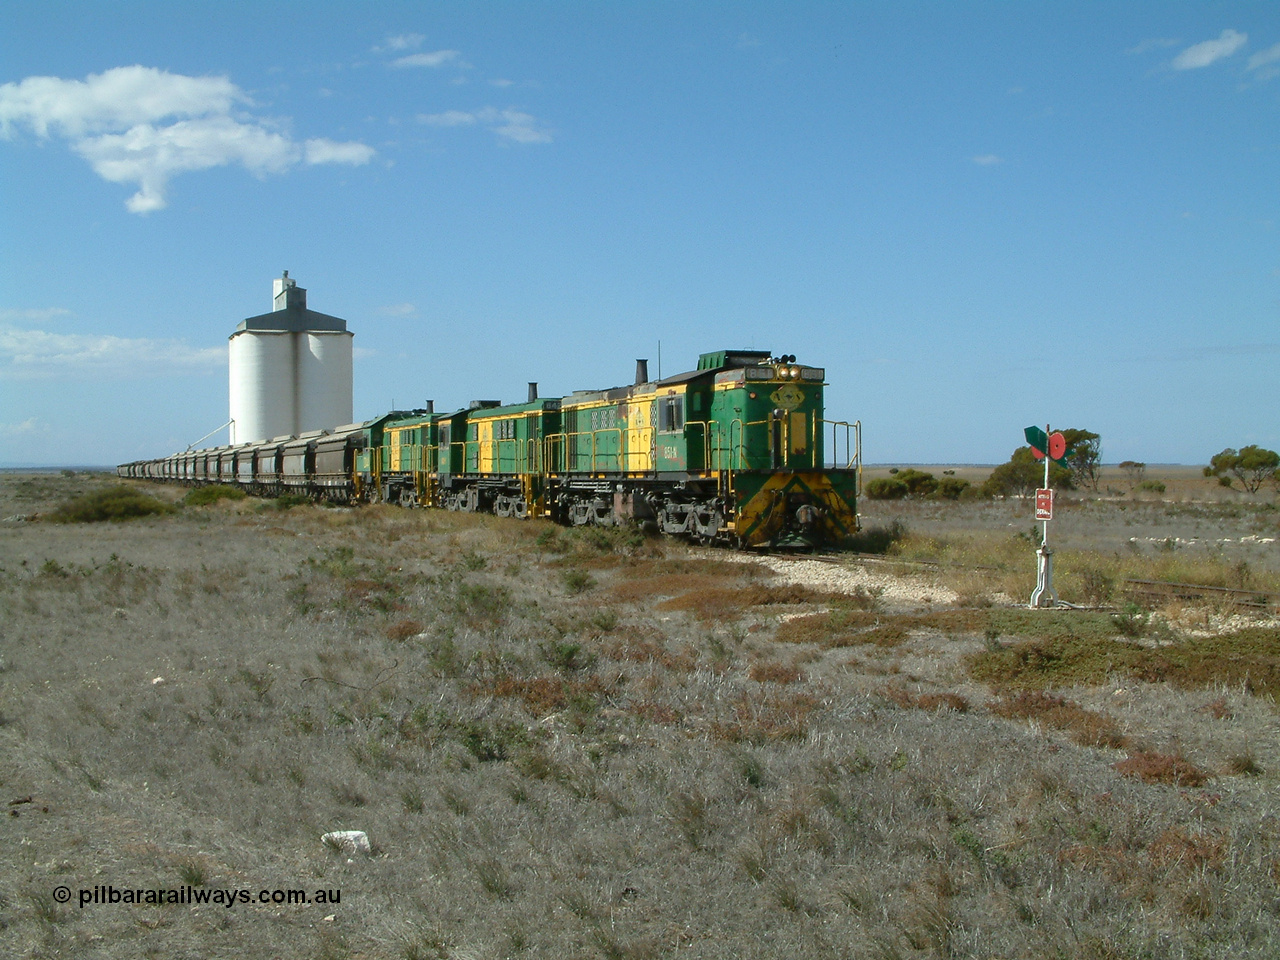 030409 140620
Wharminda, loaded grain train arrives behind 830 class unit 851 AE Goodwin ALCo model DL531 serial 84137, 851 has spent its entire operating career on the Eyre Peninsula, with fellow 830 class 842 serial 84140 and a rebuilt unit DA 4 as they stop to pick up loaded waggons.
Keywords: 830-class;851;84137;AE-Goodwin;ALCo;DL531;